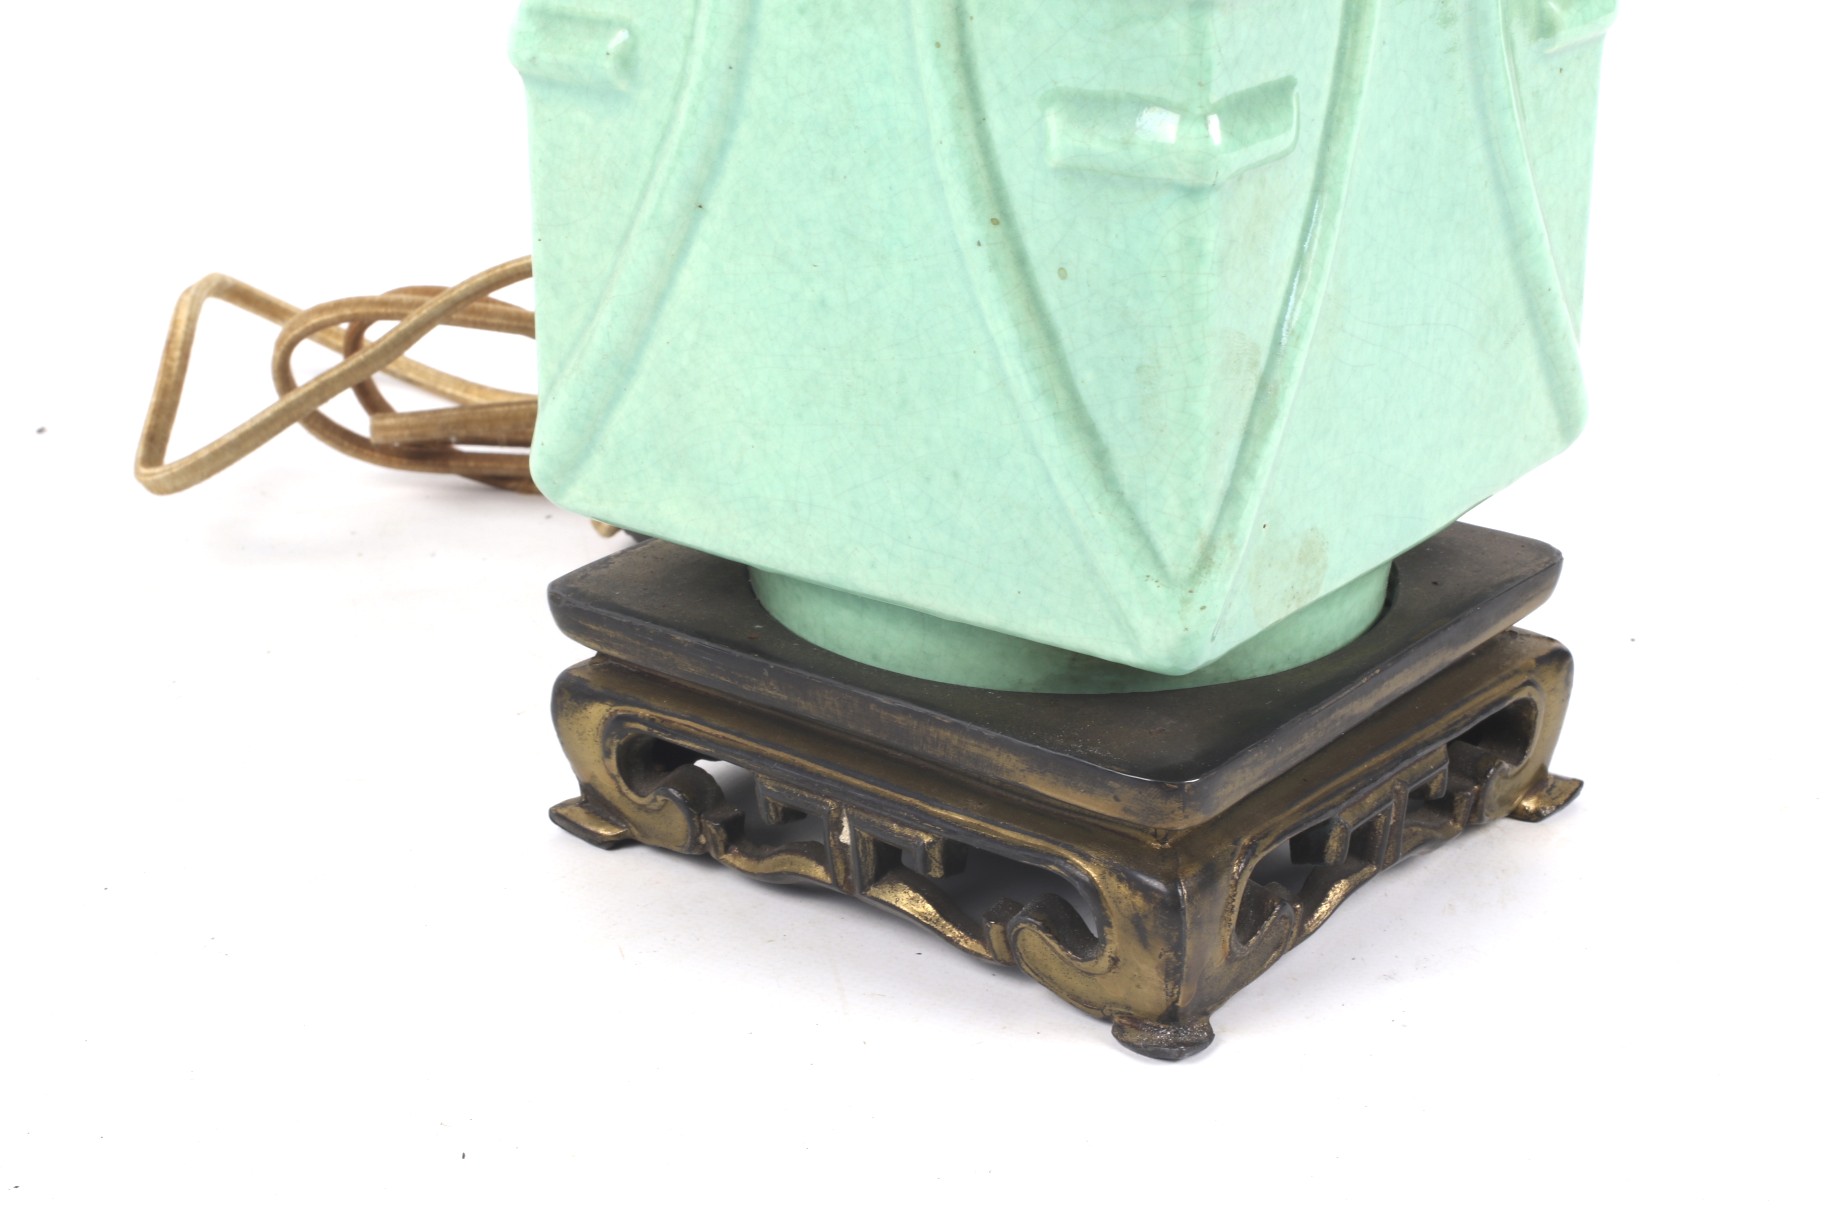 Cong lamp : A mid-20th century pale green glazed Chinese ceramic electric table lamp. - Image 2 of 8